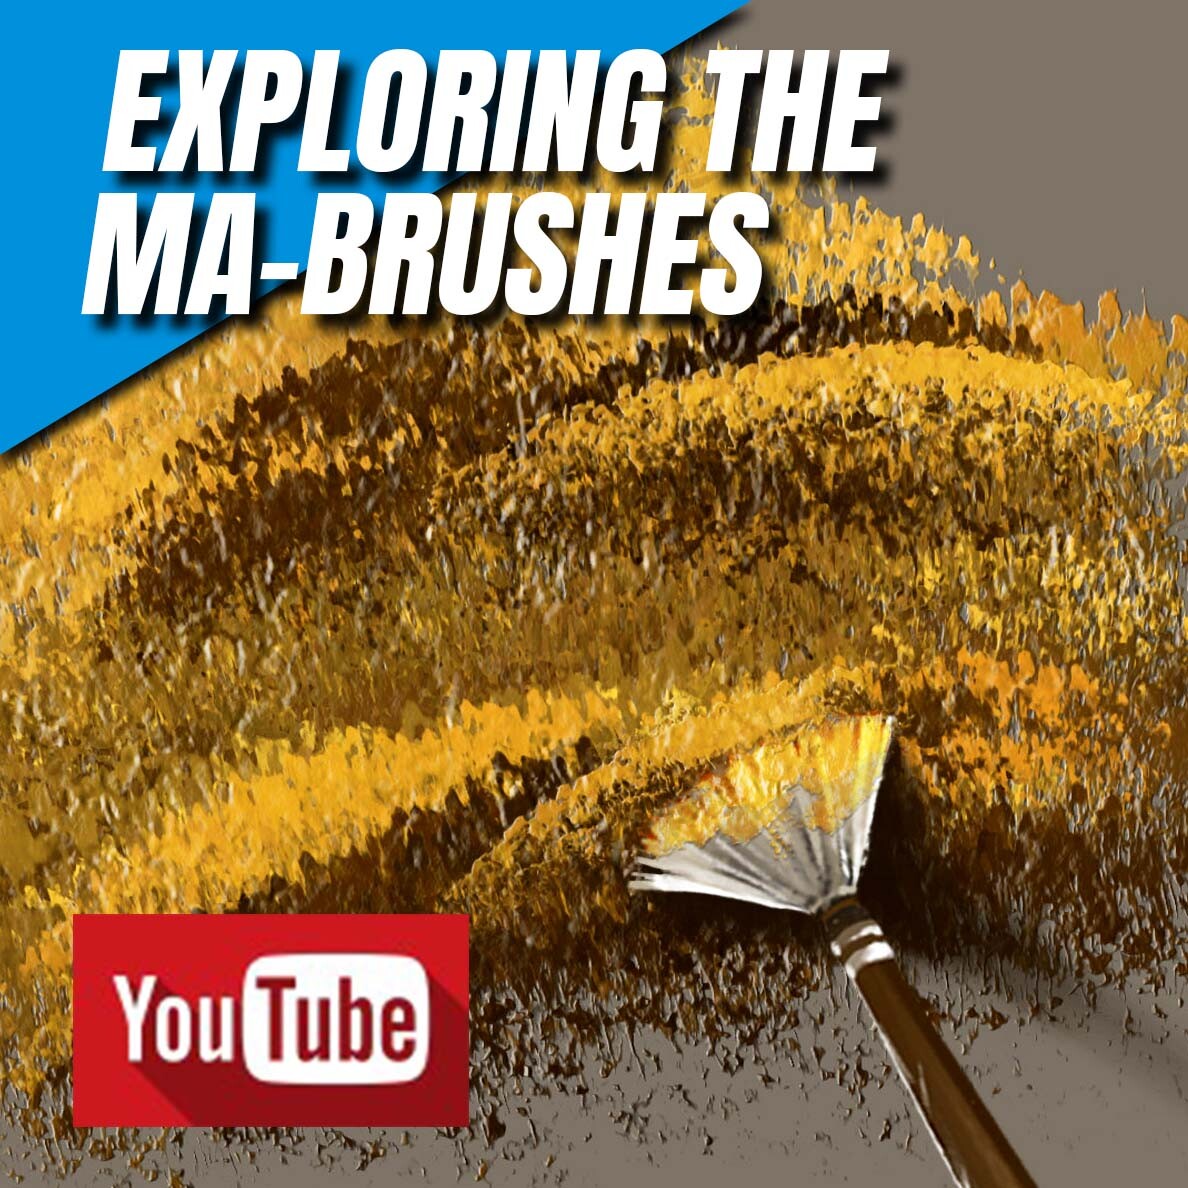 Exploring the MA-Brushes - Digital OIL Brushes for Photoshop